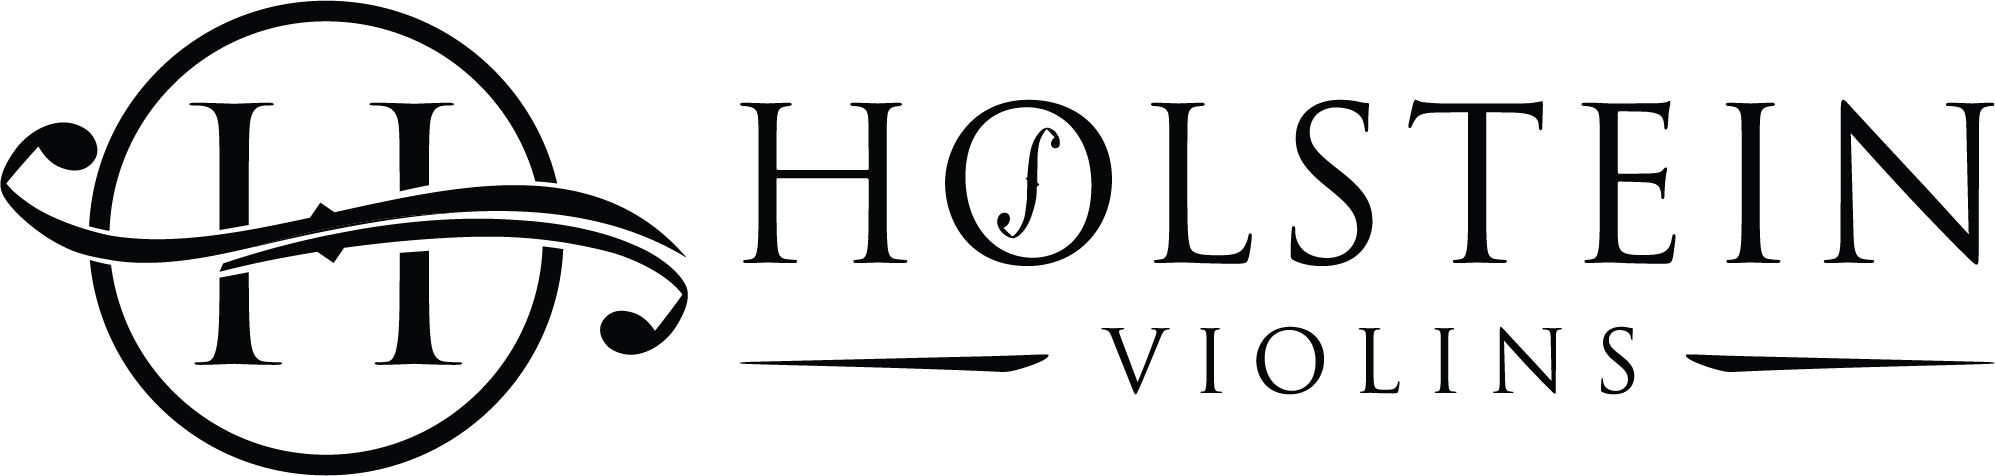 Holstein Violins logo, representing high quality hand made string instruments such as violins, violas and cellos.